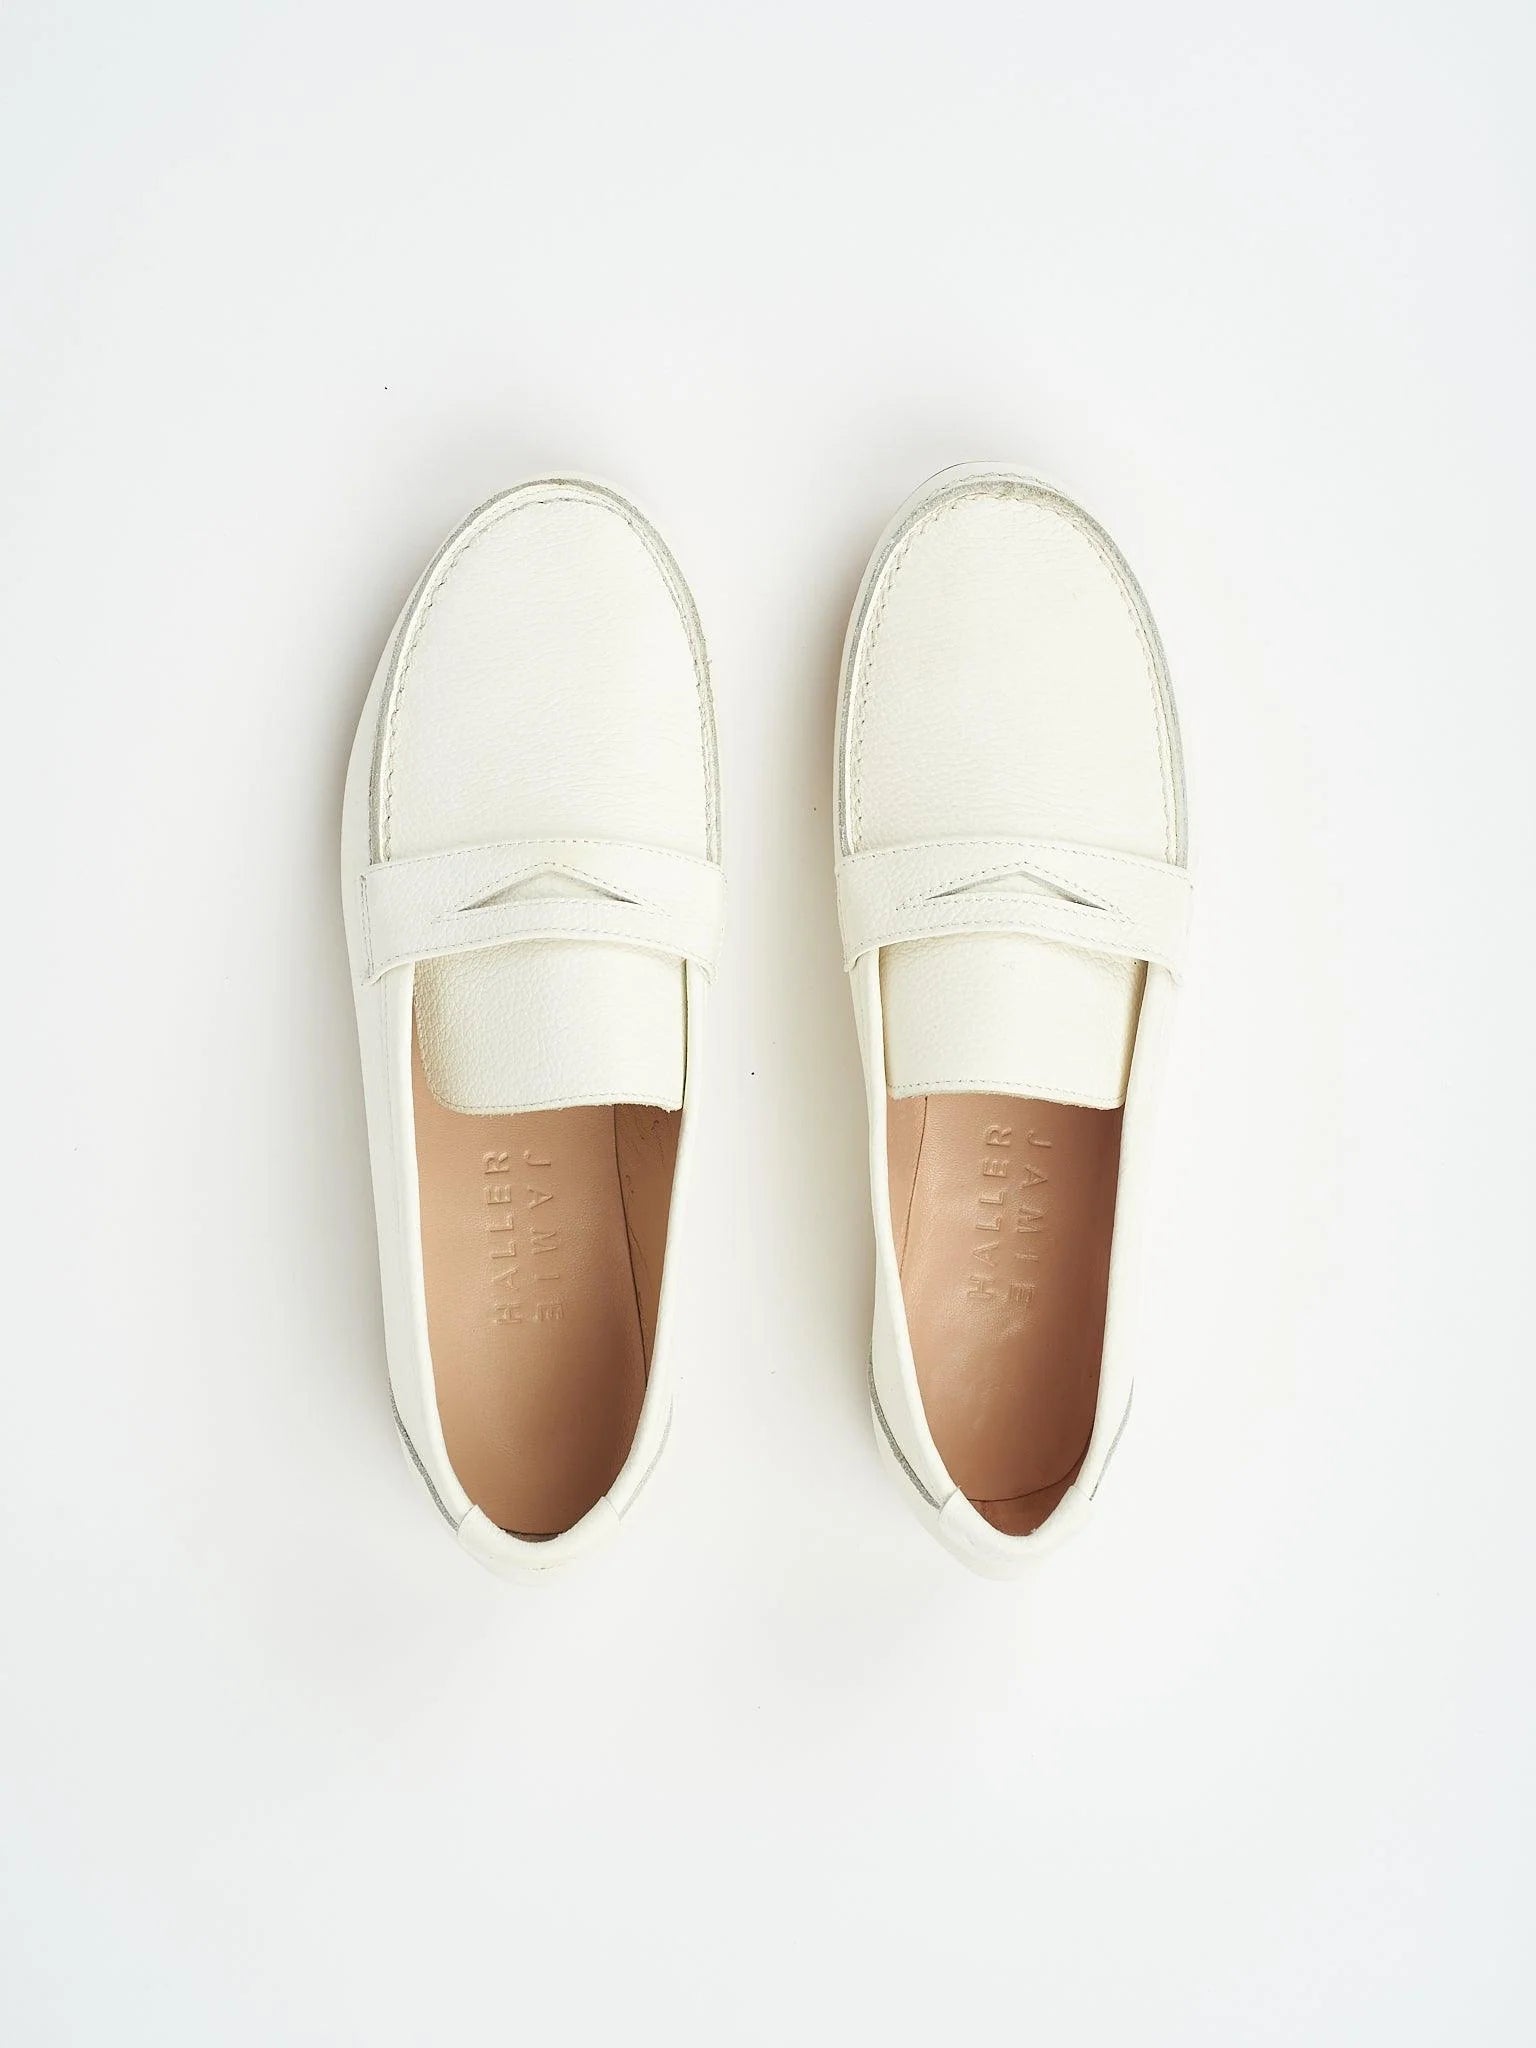 the penny loafer in white.